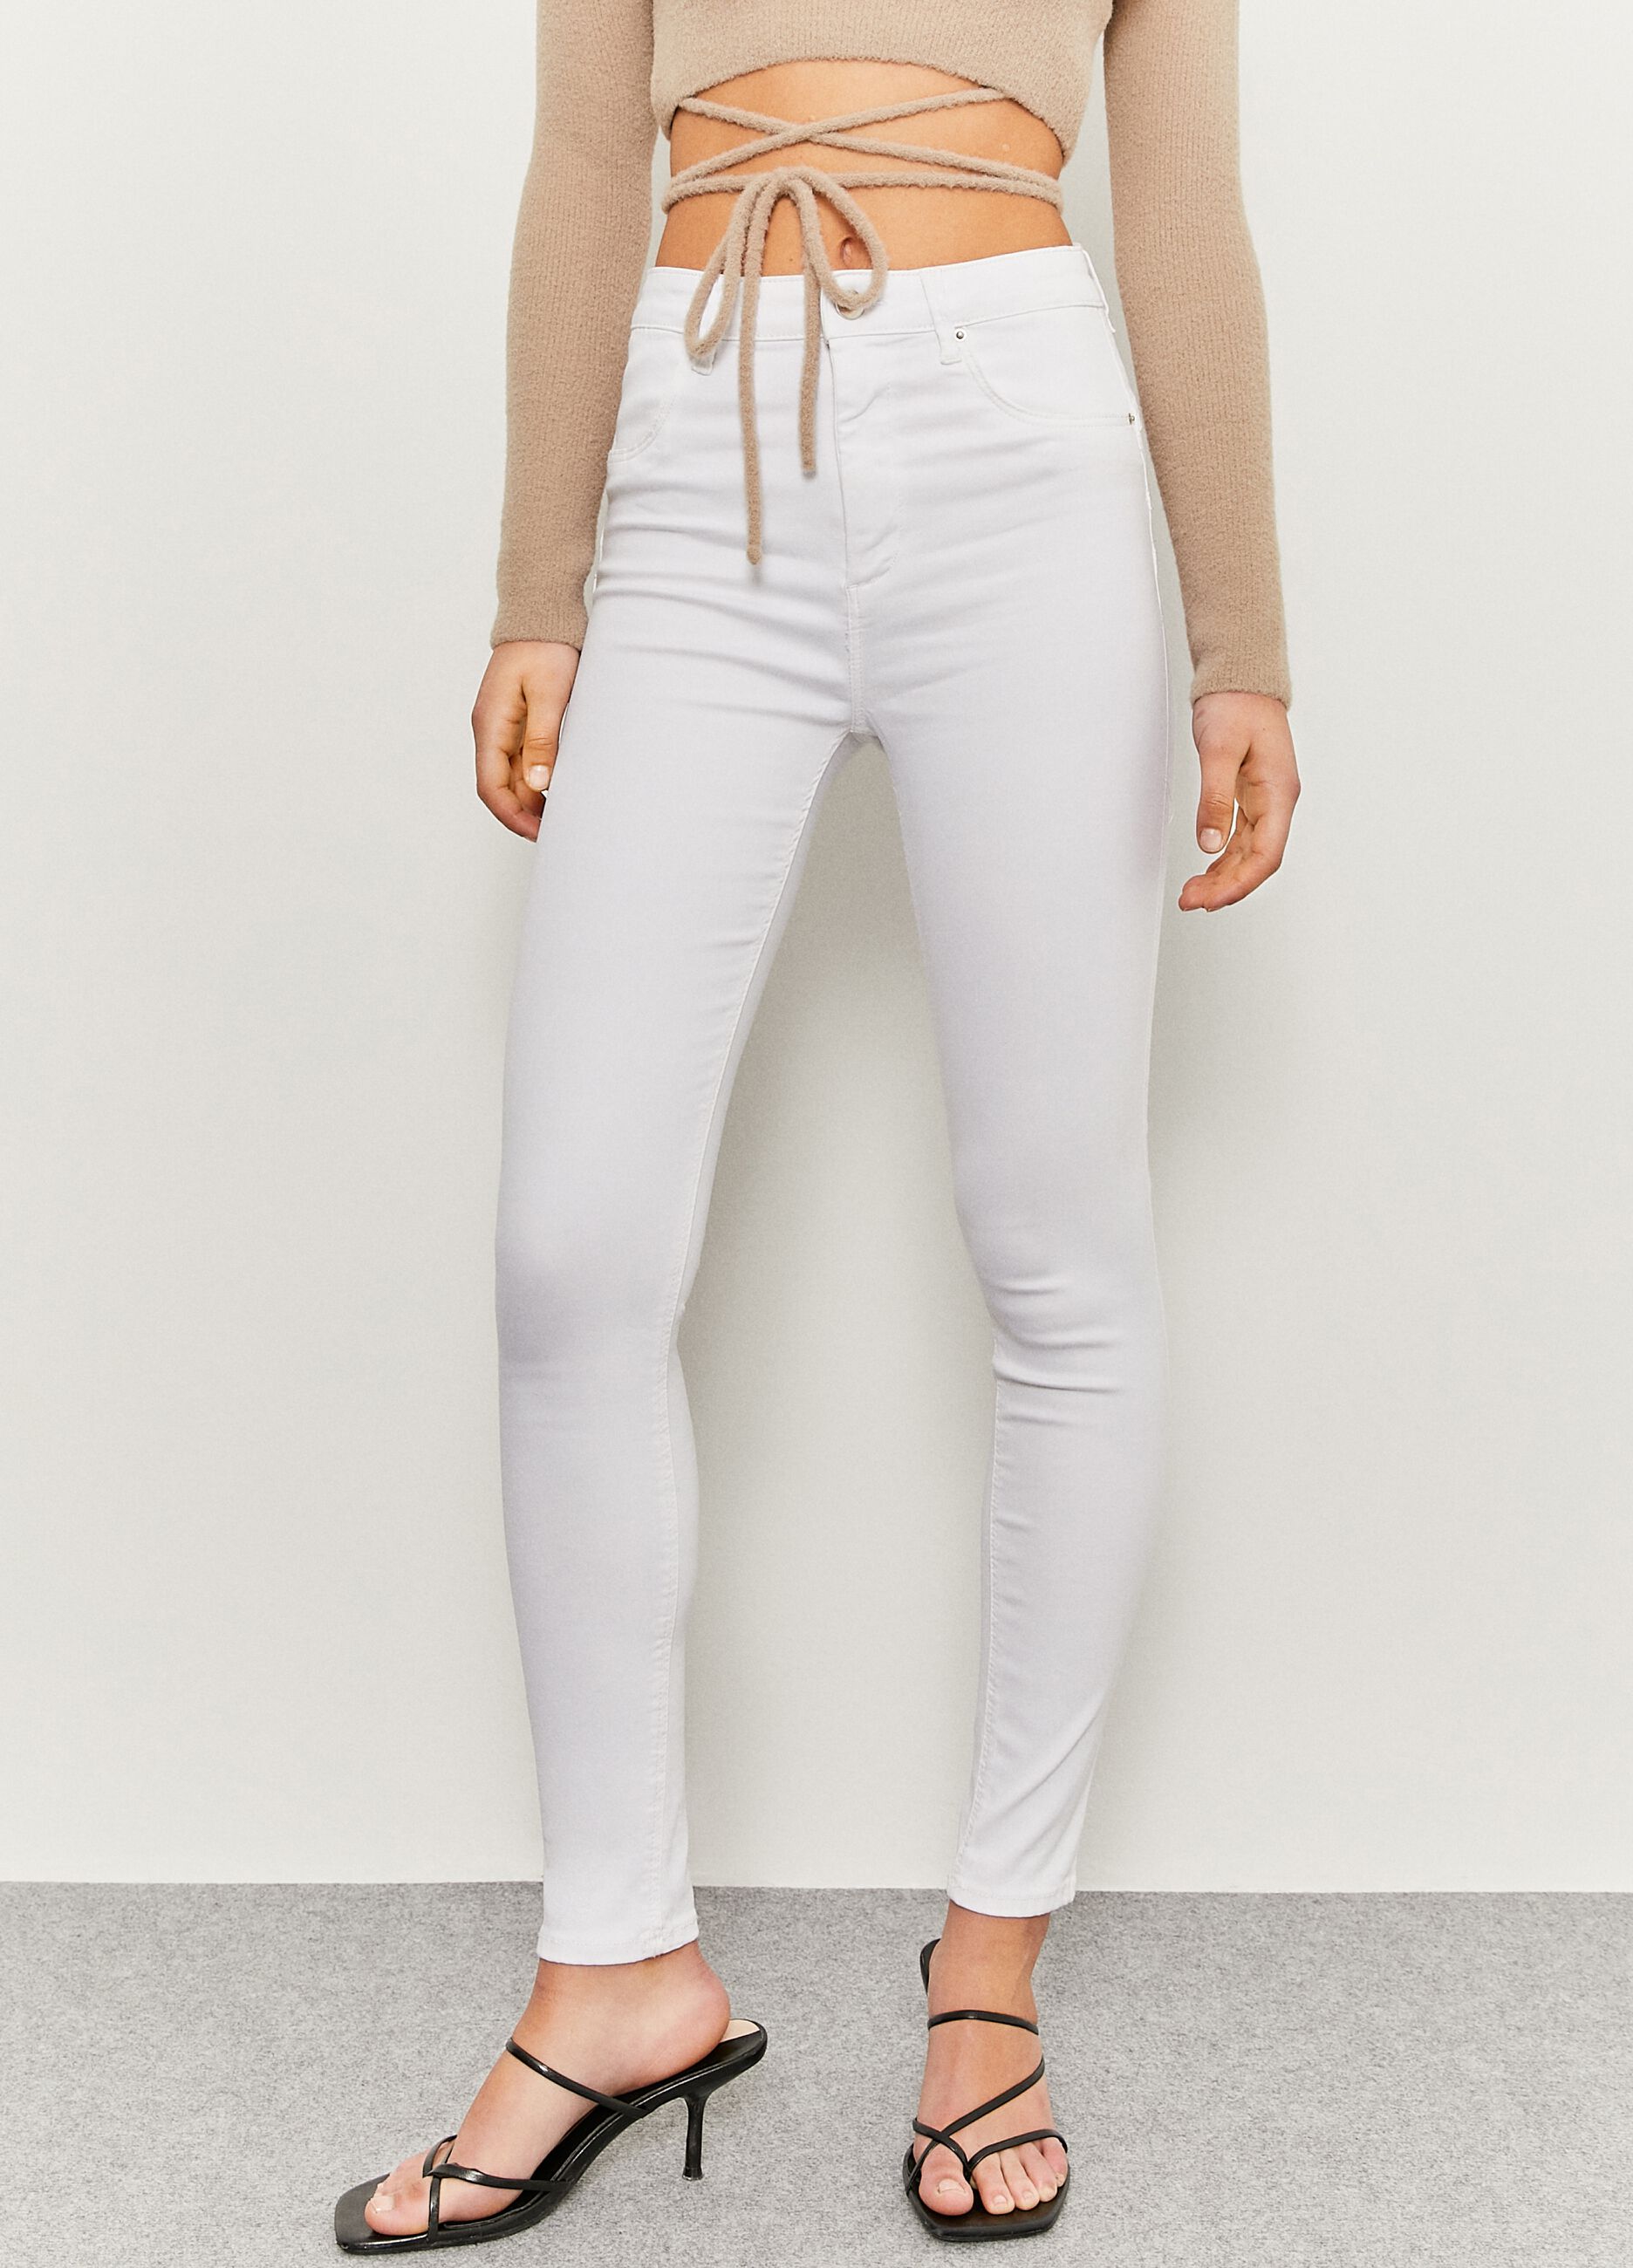 Stretch push-up jeans